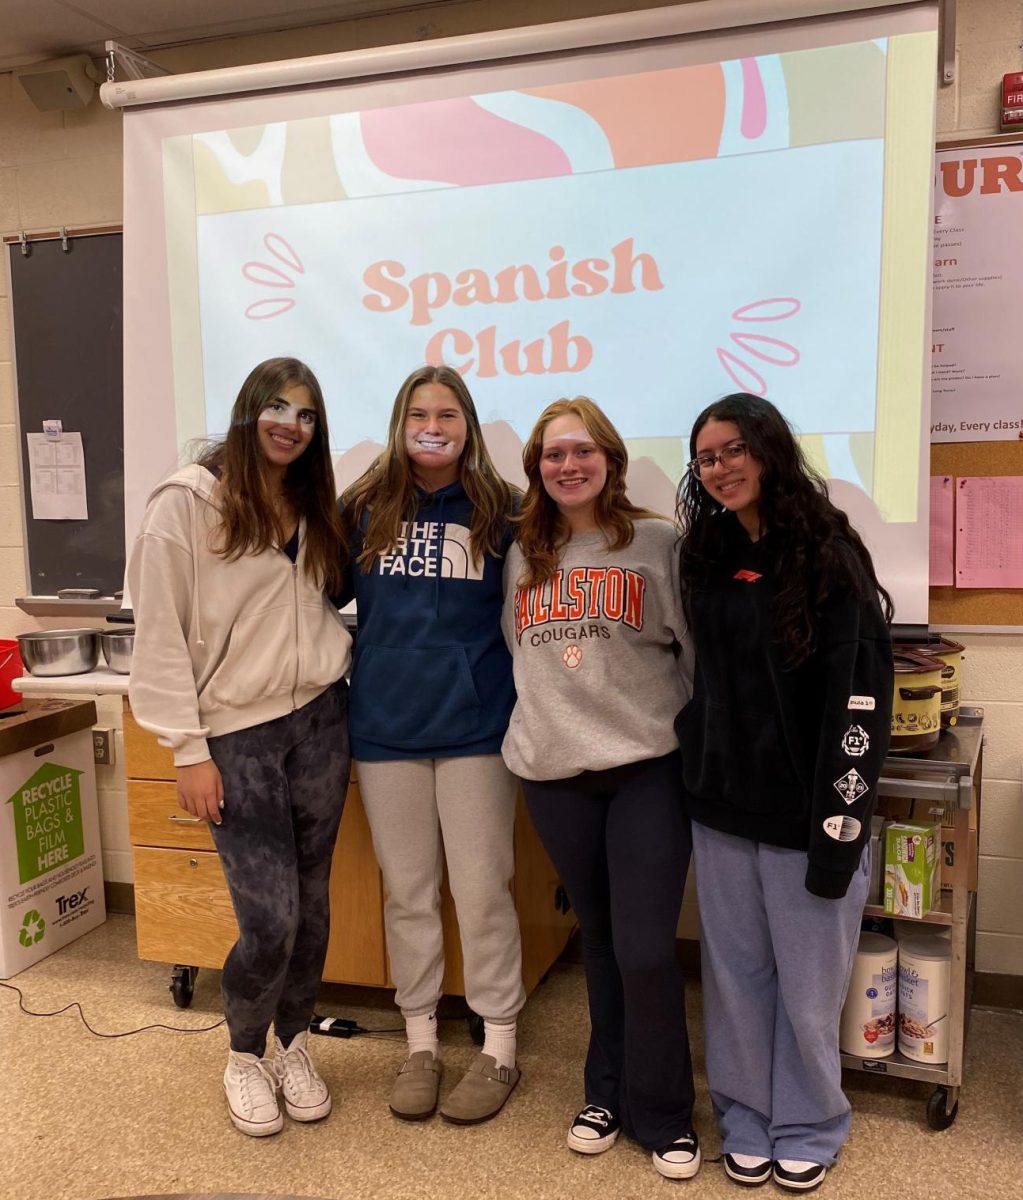 Spanish club officers posing for a picture. From left to right, Arianna Hernandez, Claire Musser, Angelina Velez, and Chloe Mullineaux. (Photo courtesy of Kasey Conlon.)